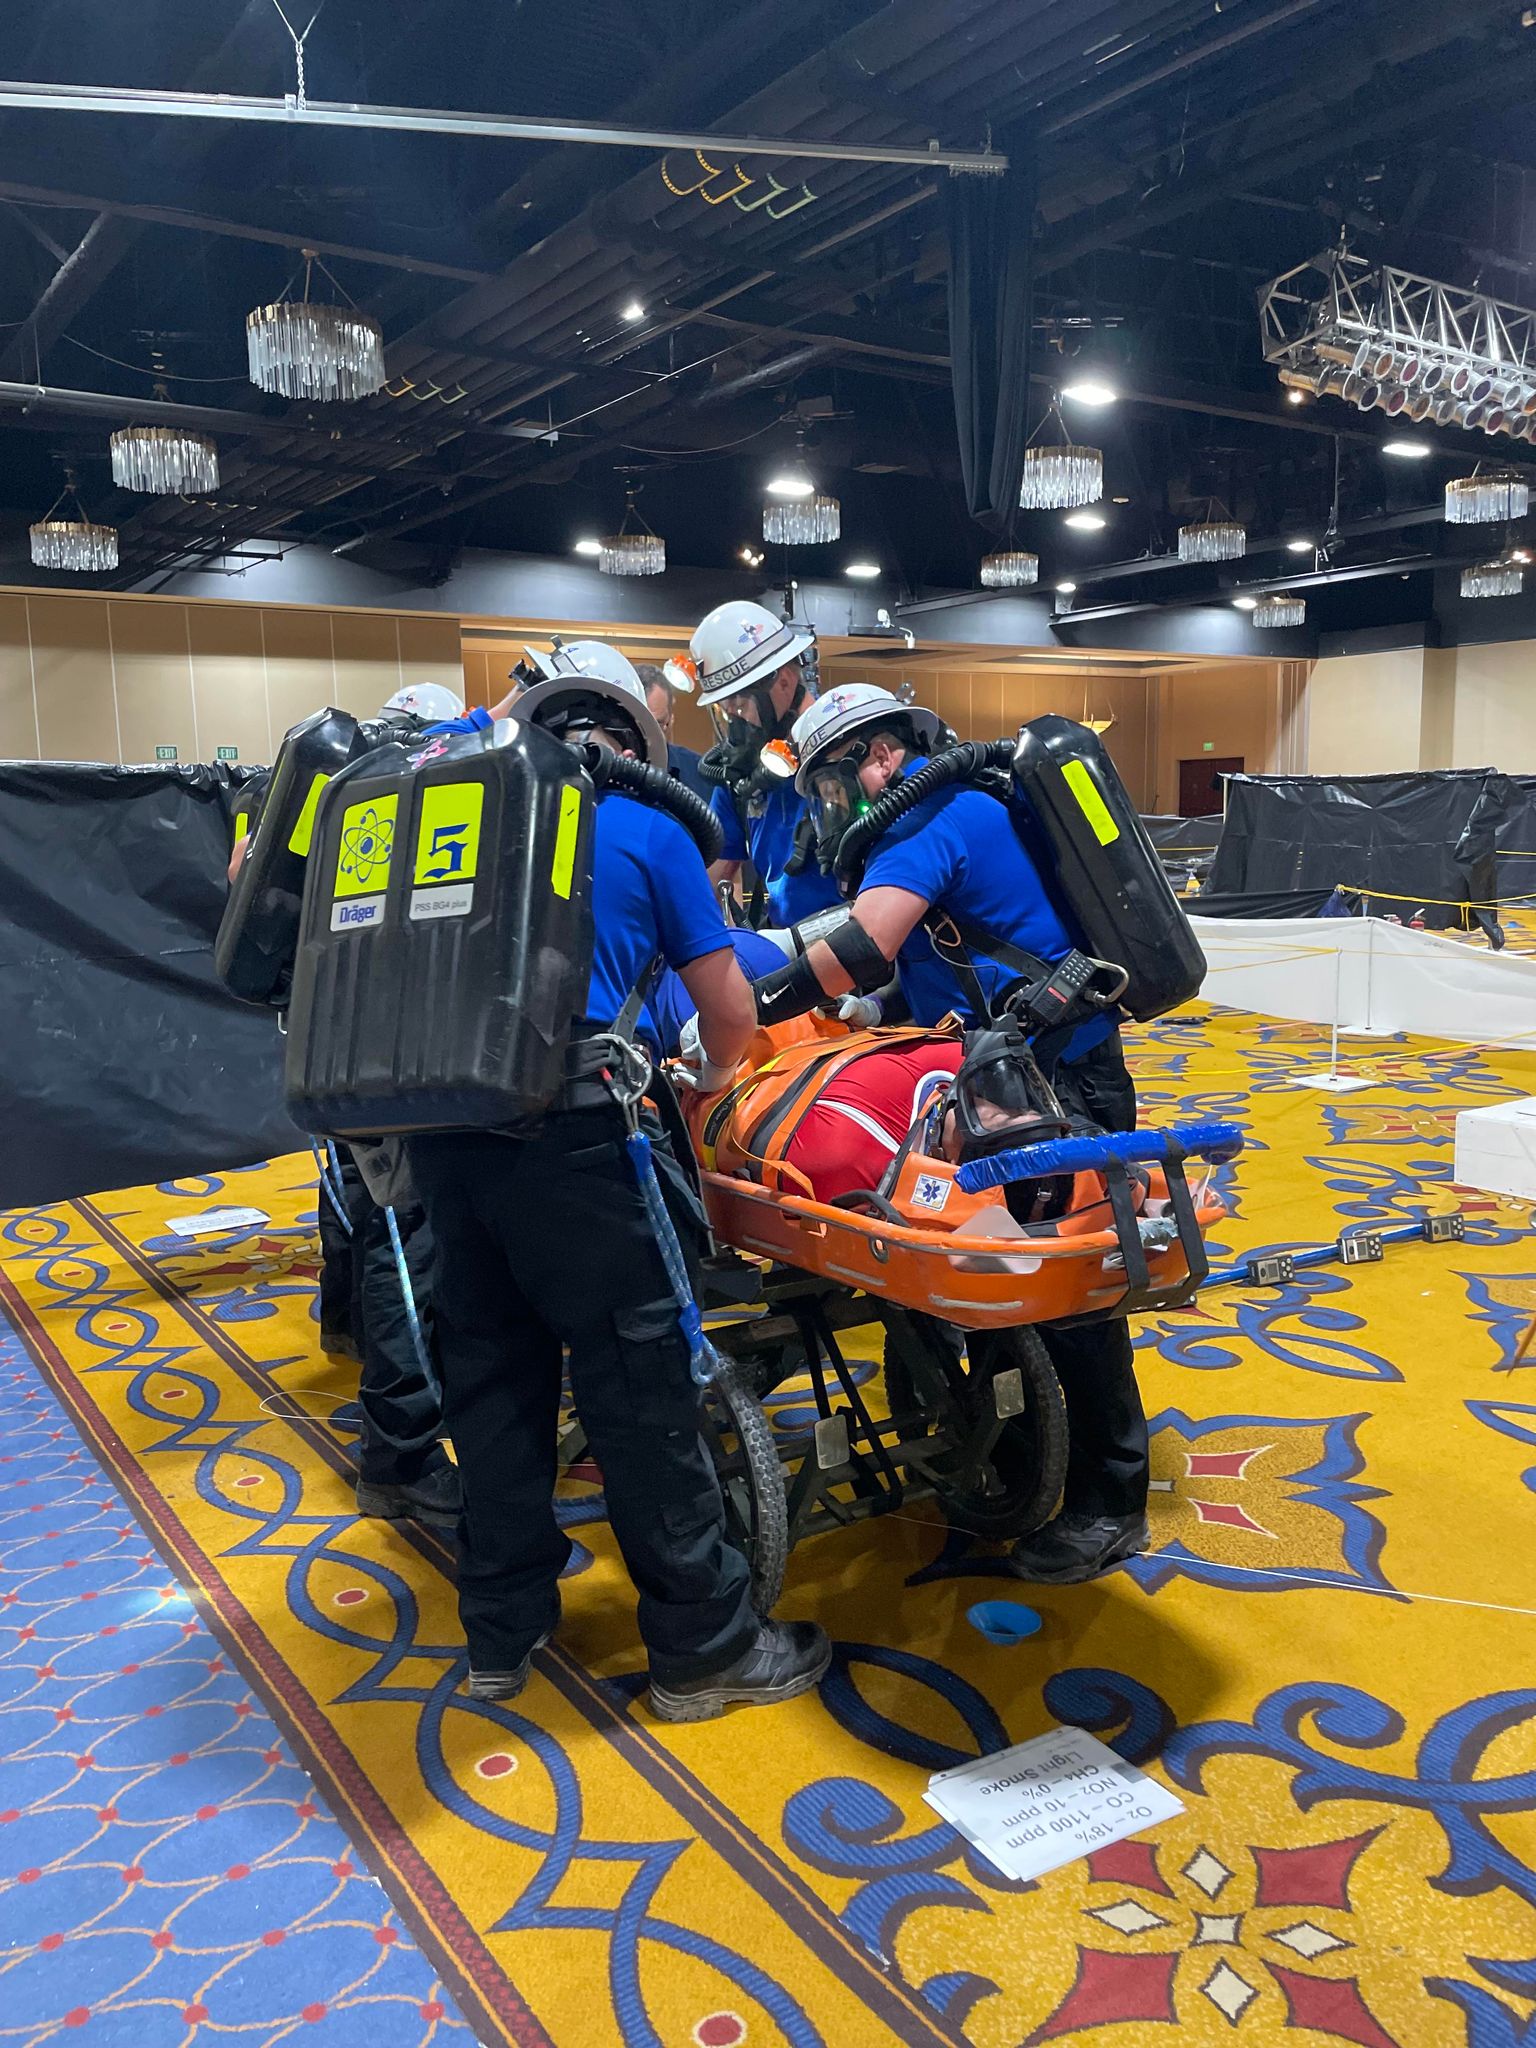 Mine Rescue Blue team during their competition run